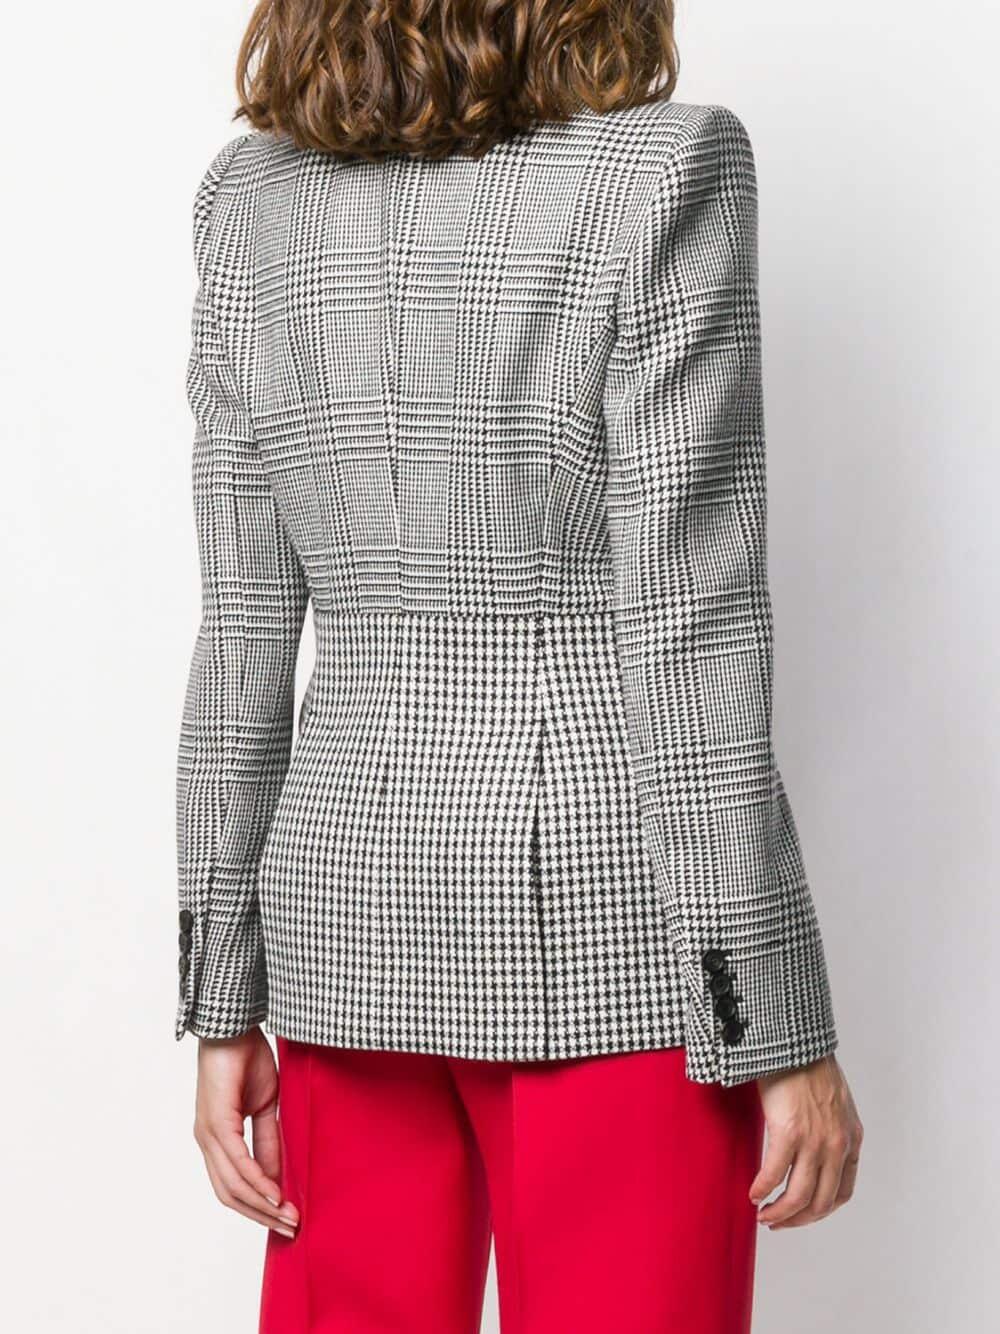 Alexander McQueen - Black & White Prince Of Wales & Houndstooth Jacket